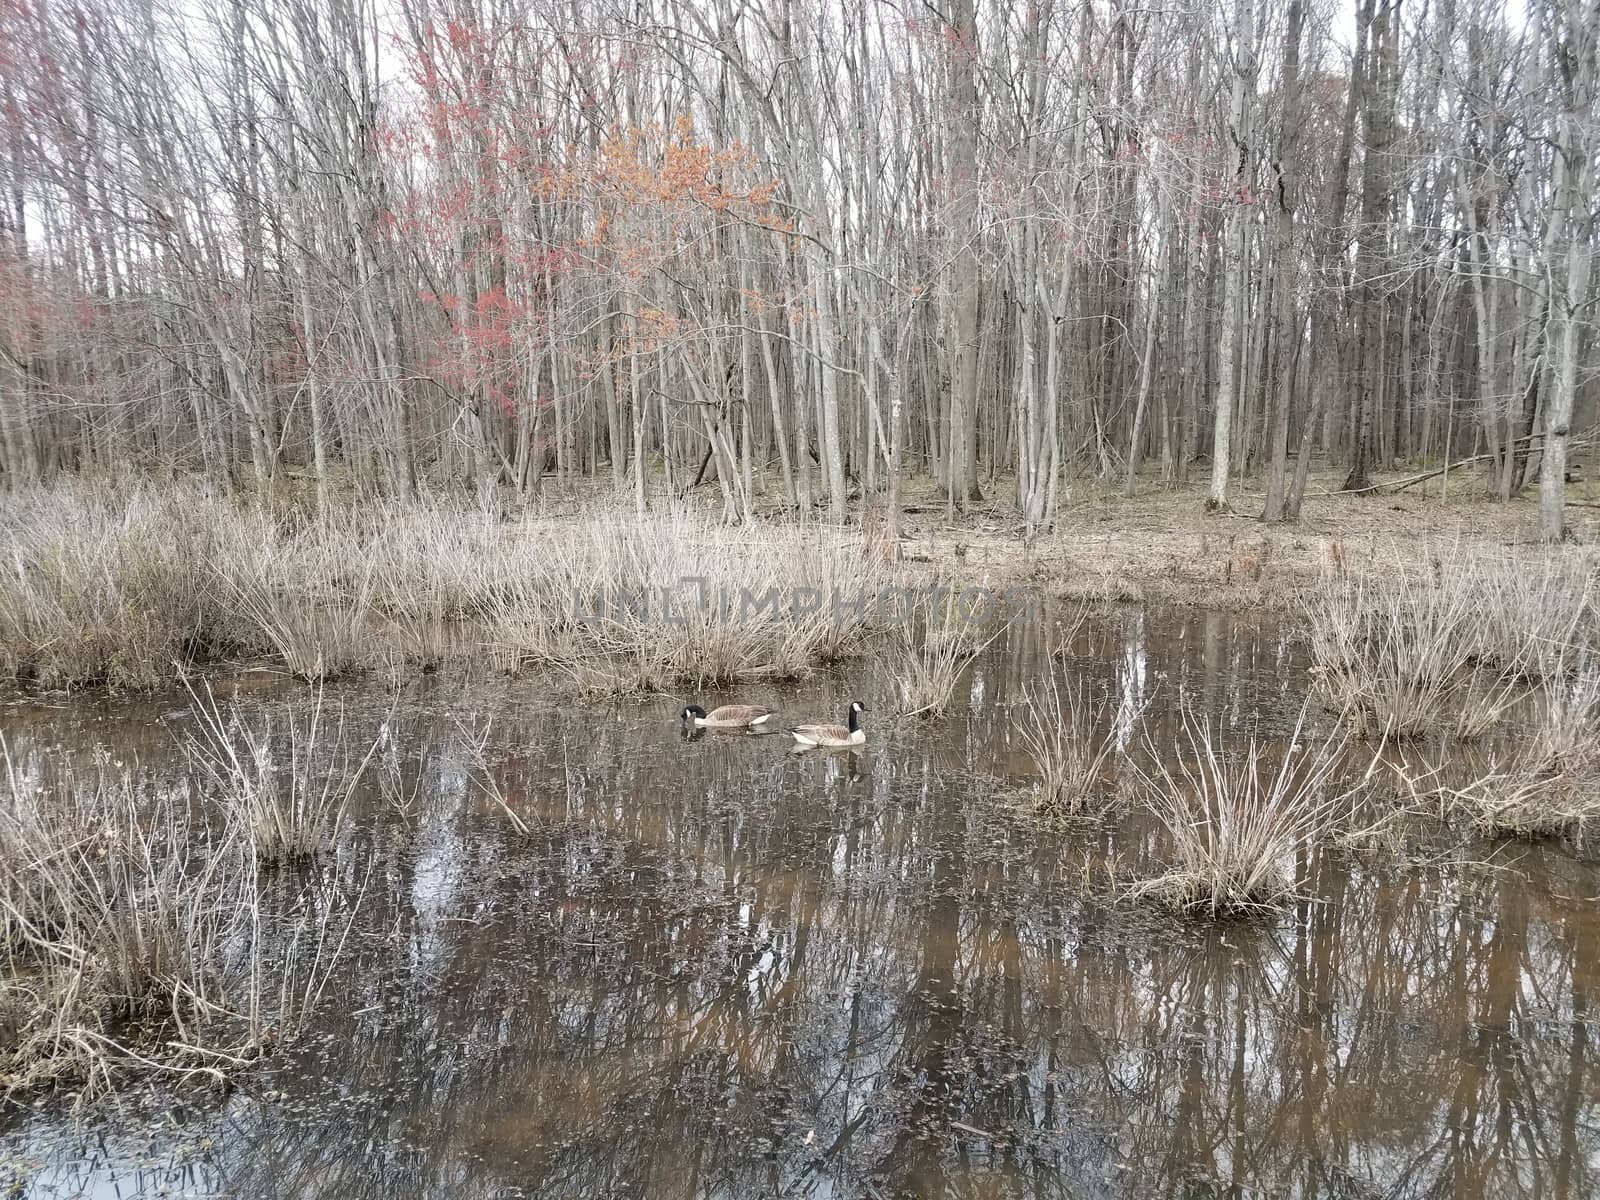 geese in water with plants and trees in wetland or swamp area